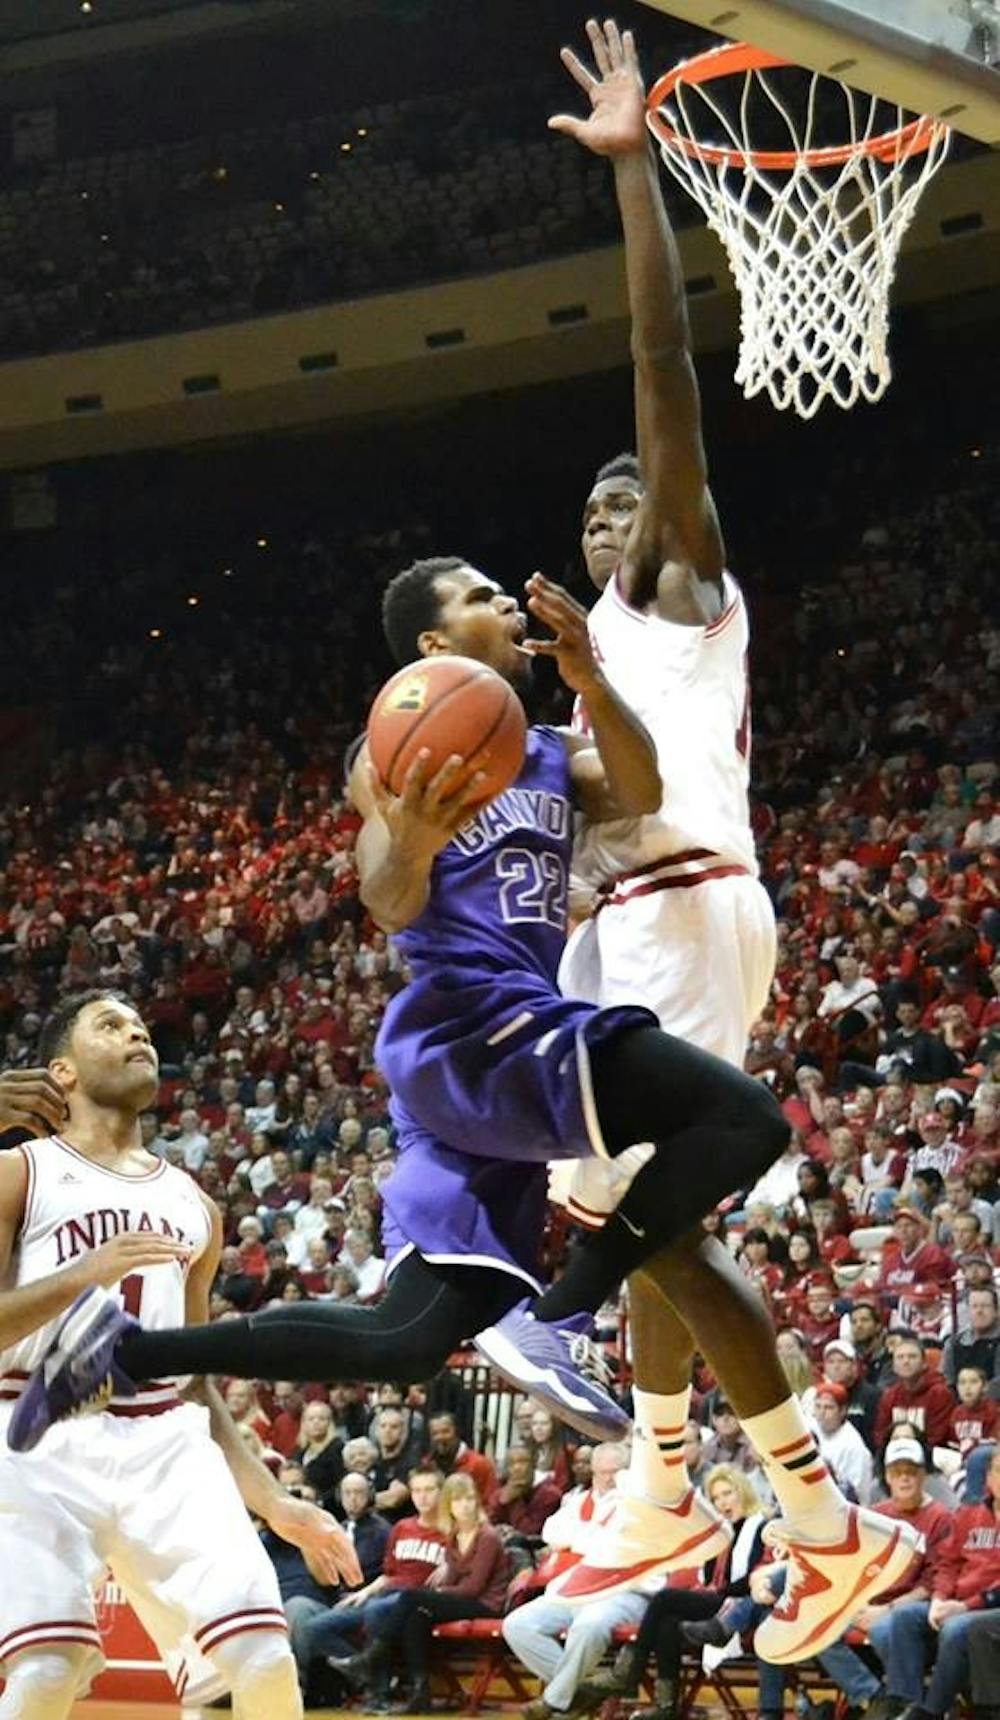 Junior forward Hanner Mosquera-Perea blocks a shot during Saturday's game against Grand Canyon University at Assembly Hall.